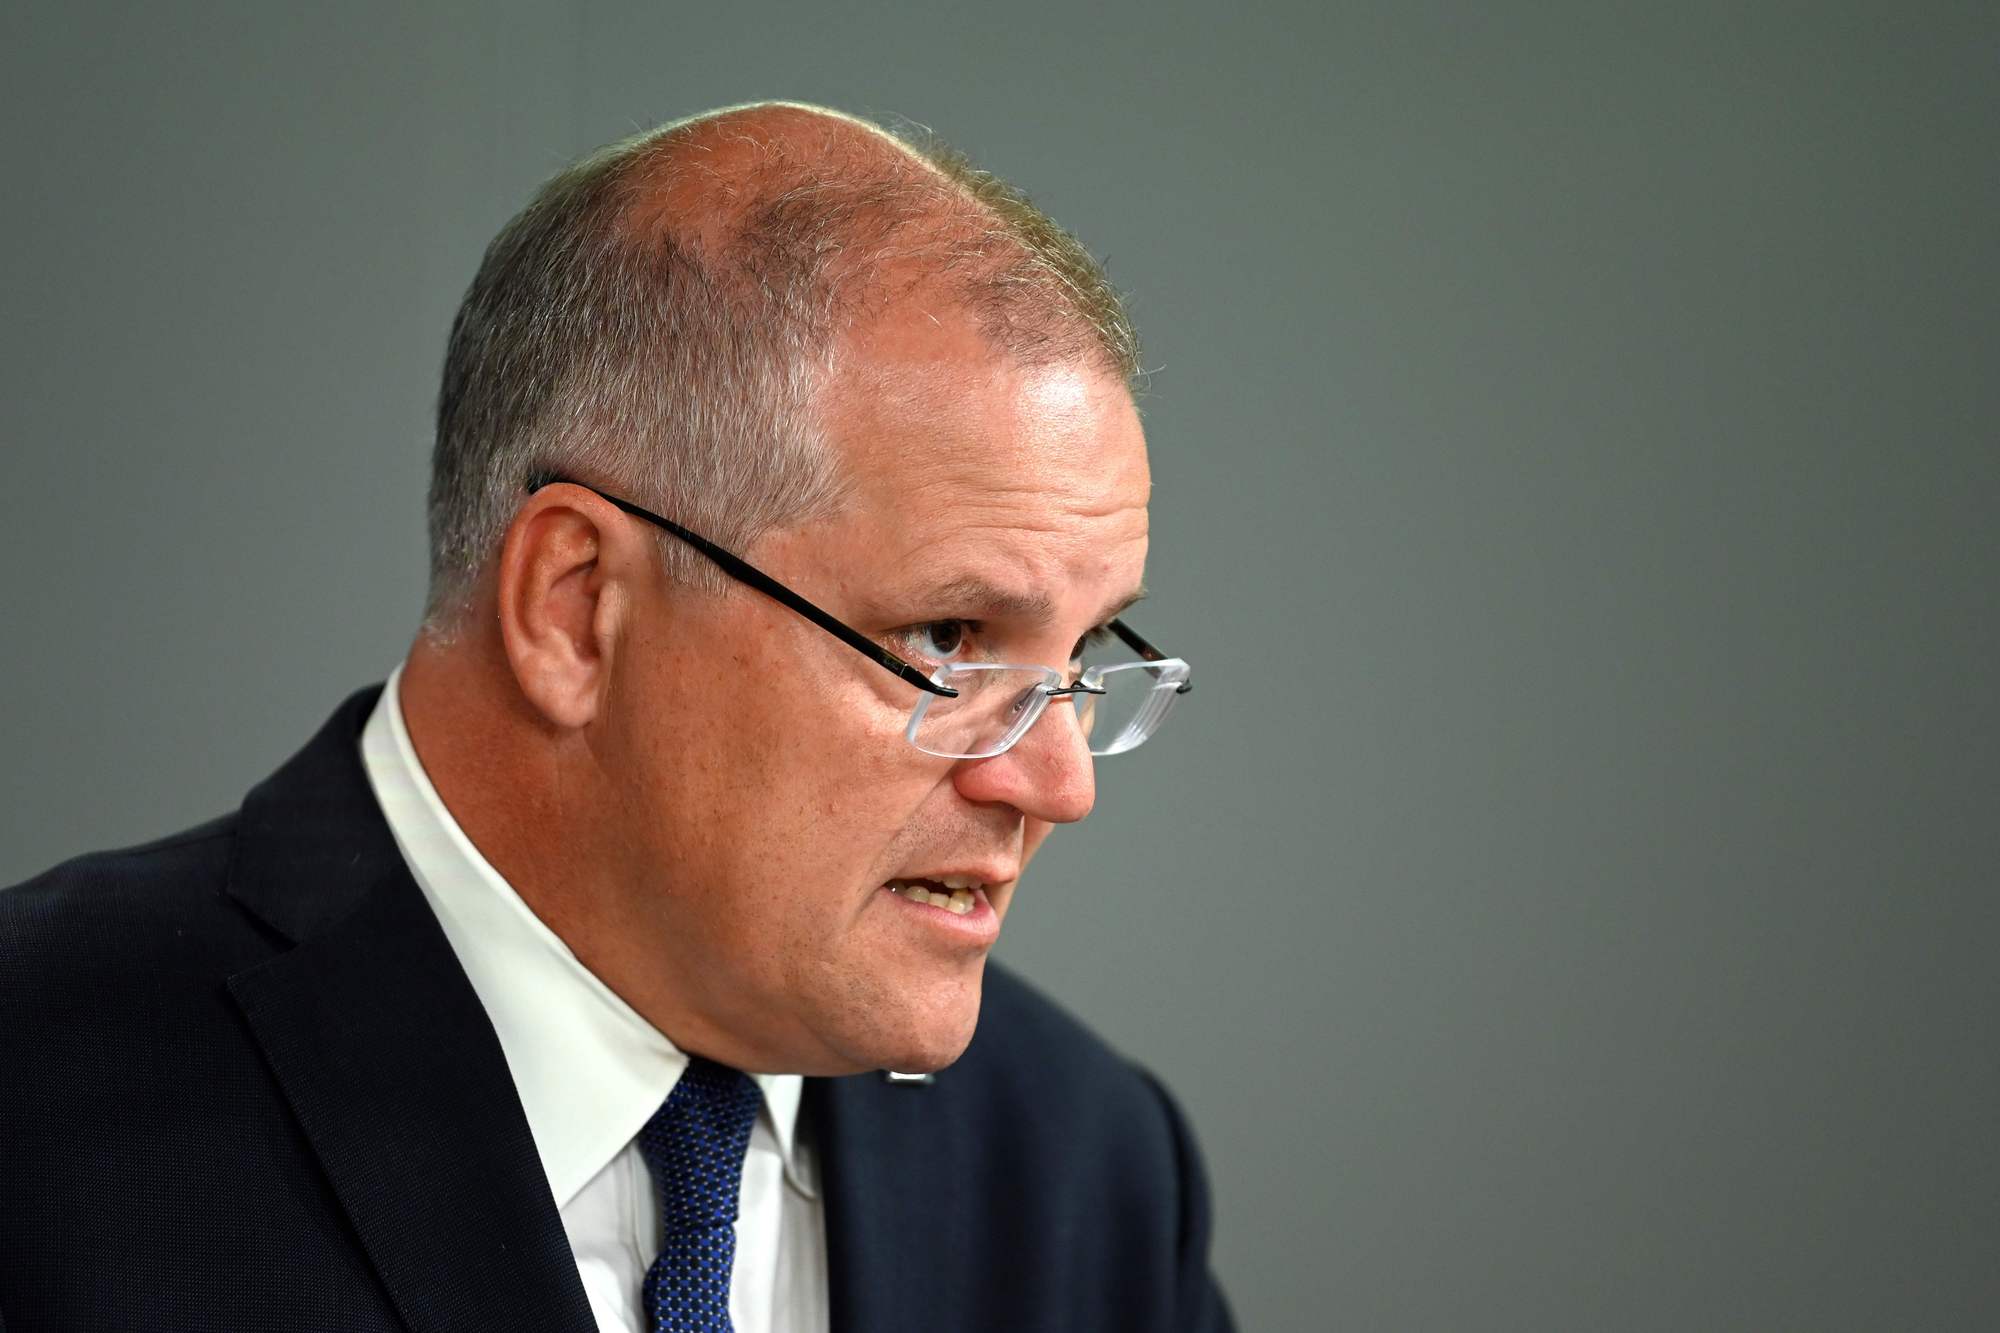 Australian PM Call for ‘Crackdown’ on ‘Ungoverned’ Internet is Walking a Dangerous Road